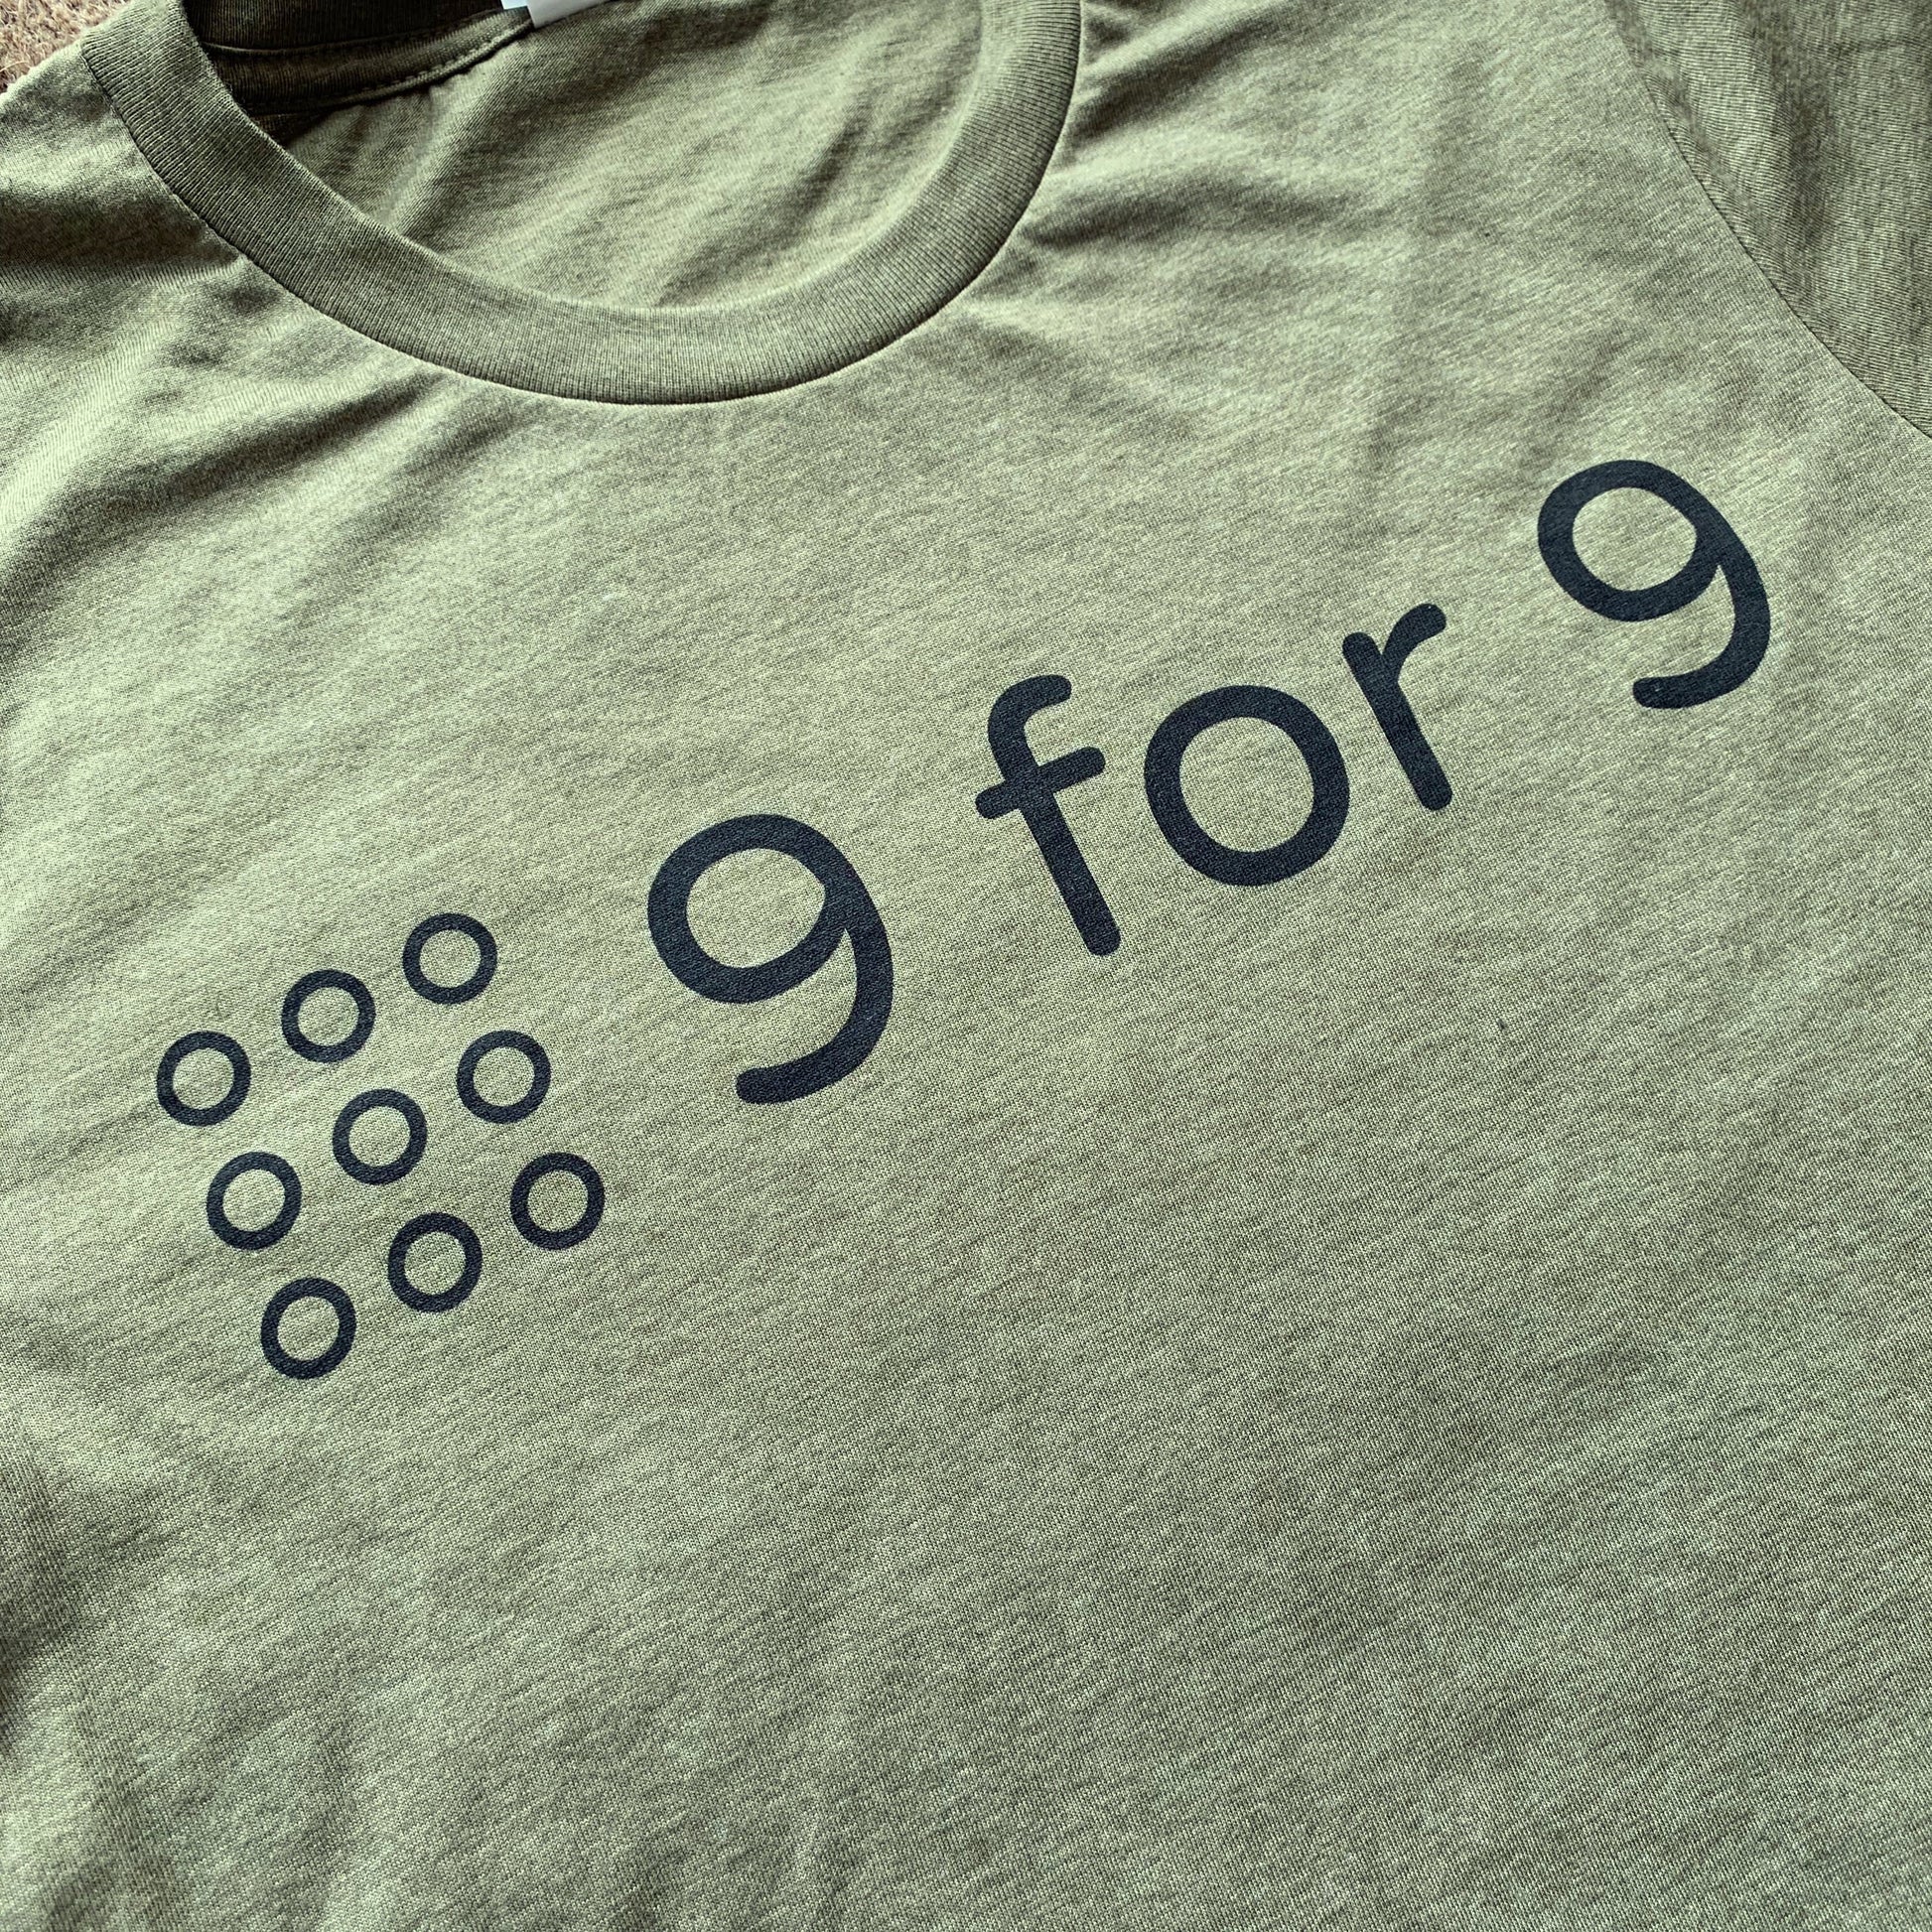 9 for 9 Unisex Tee (Heather Olive) - 9 for 9